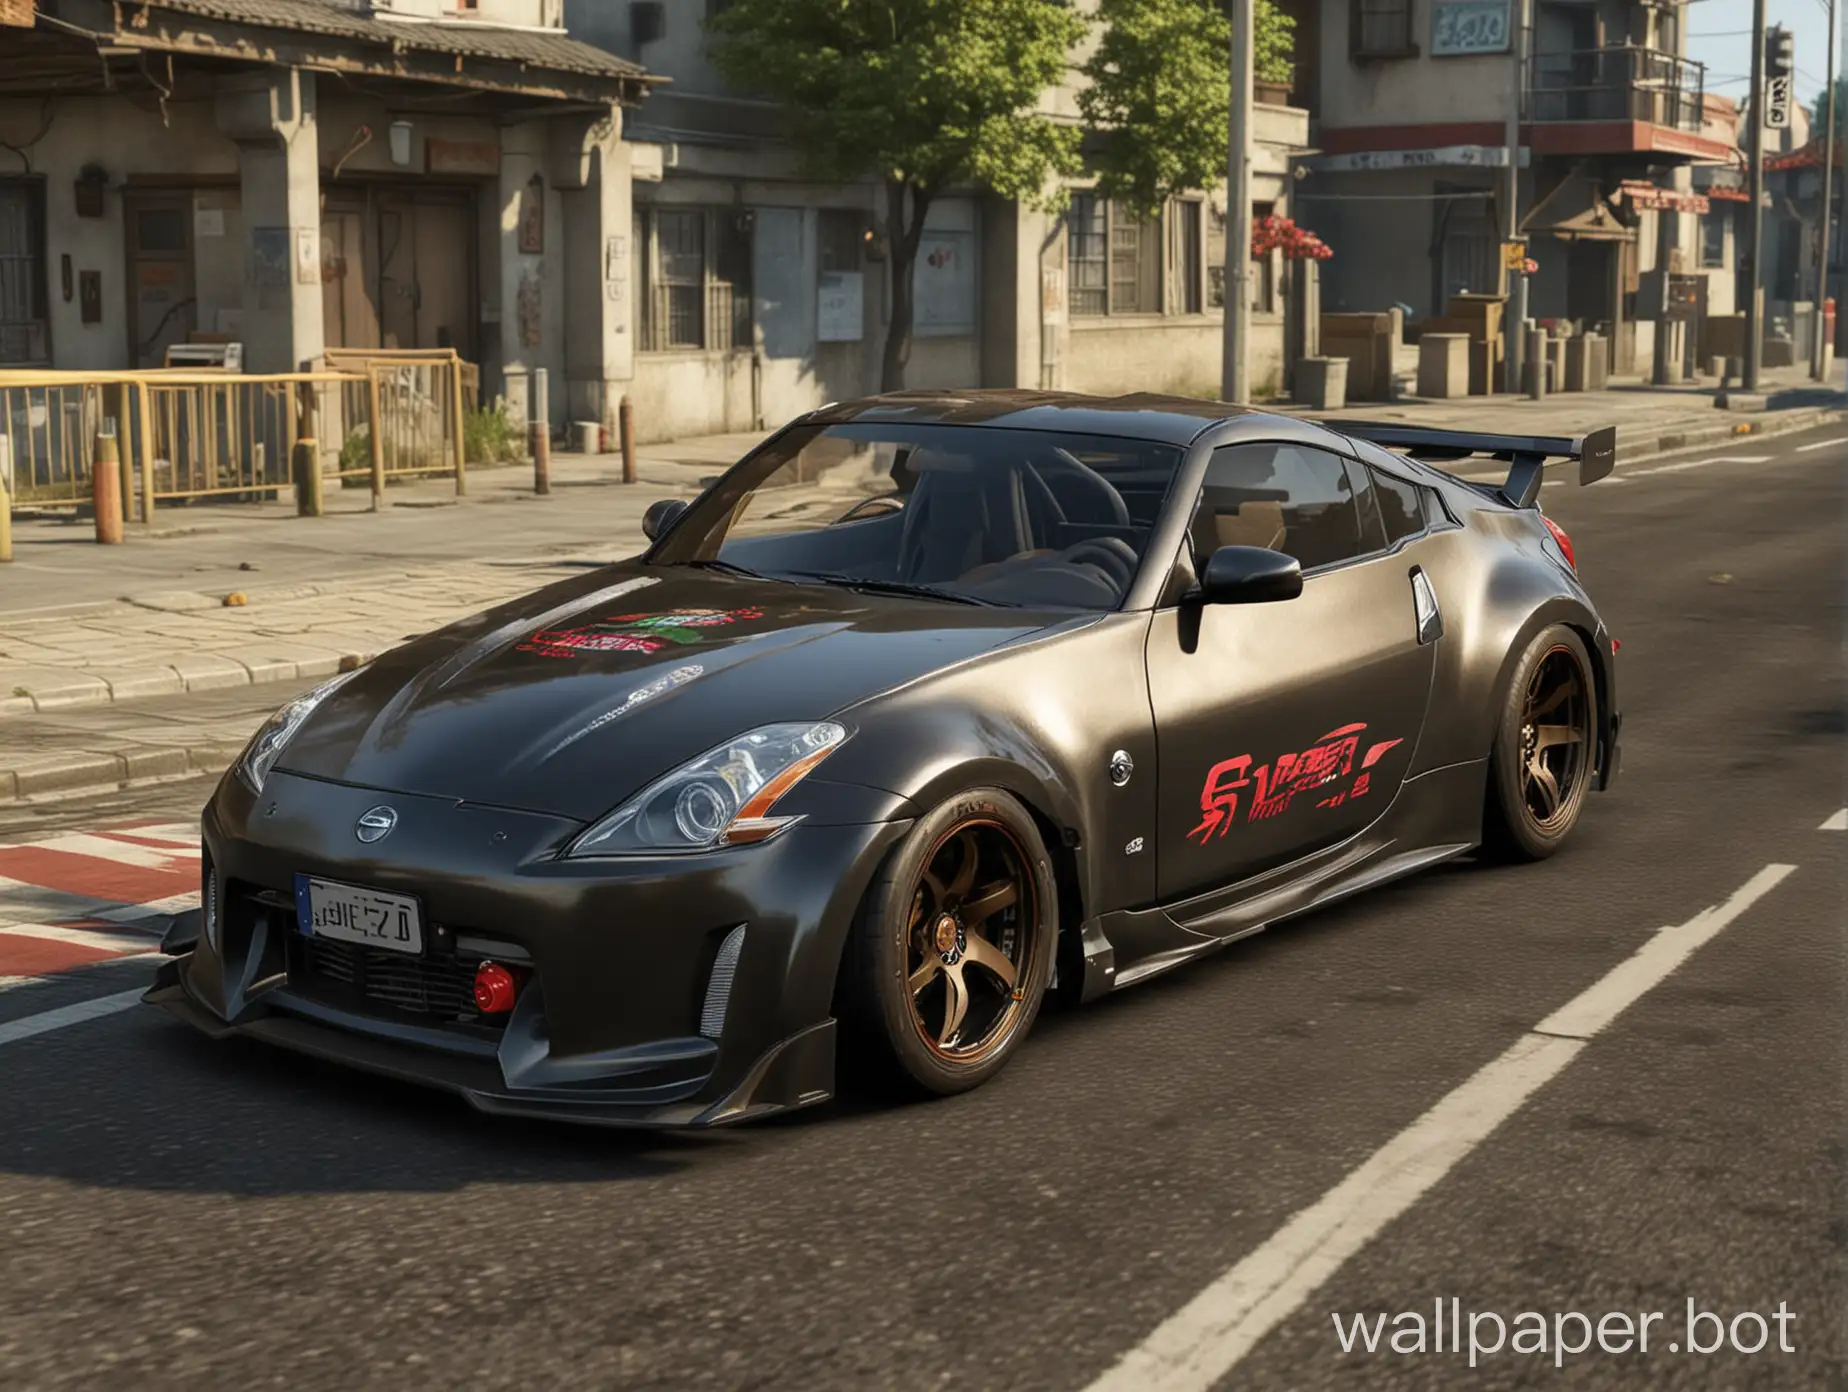  Street racing 350z - (The input is already in English, so there's no need for translation.)